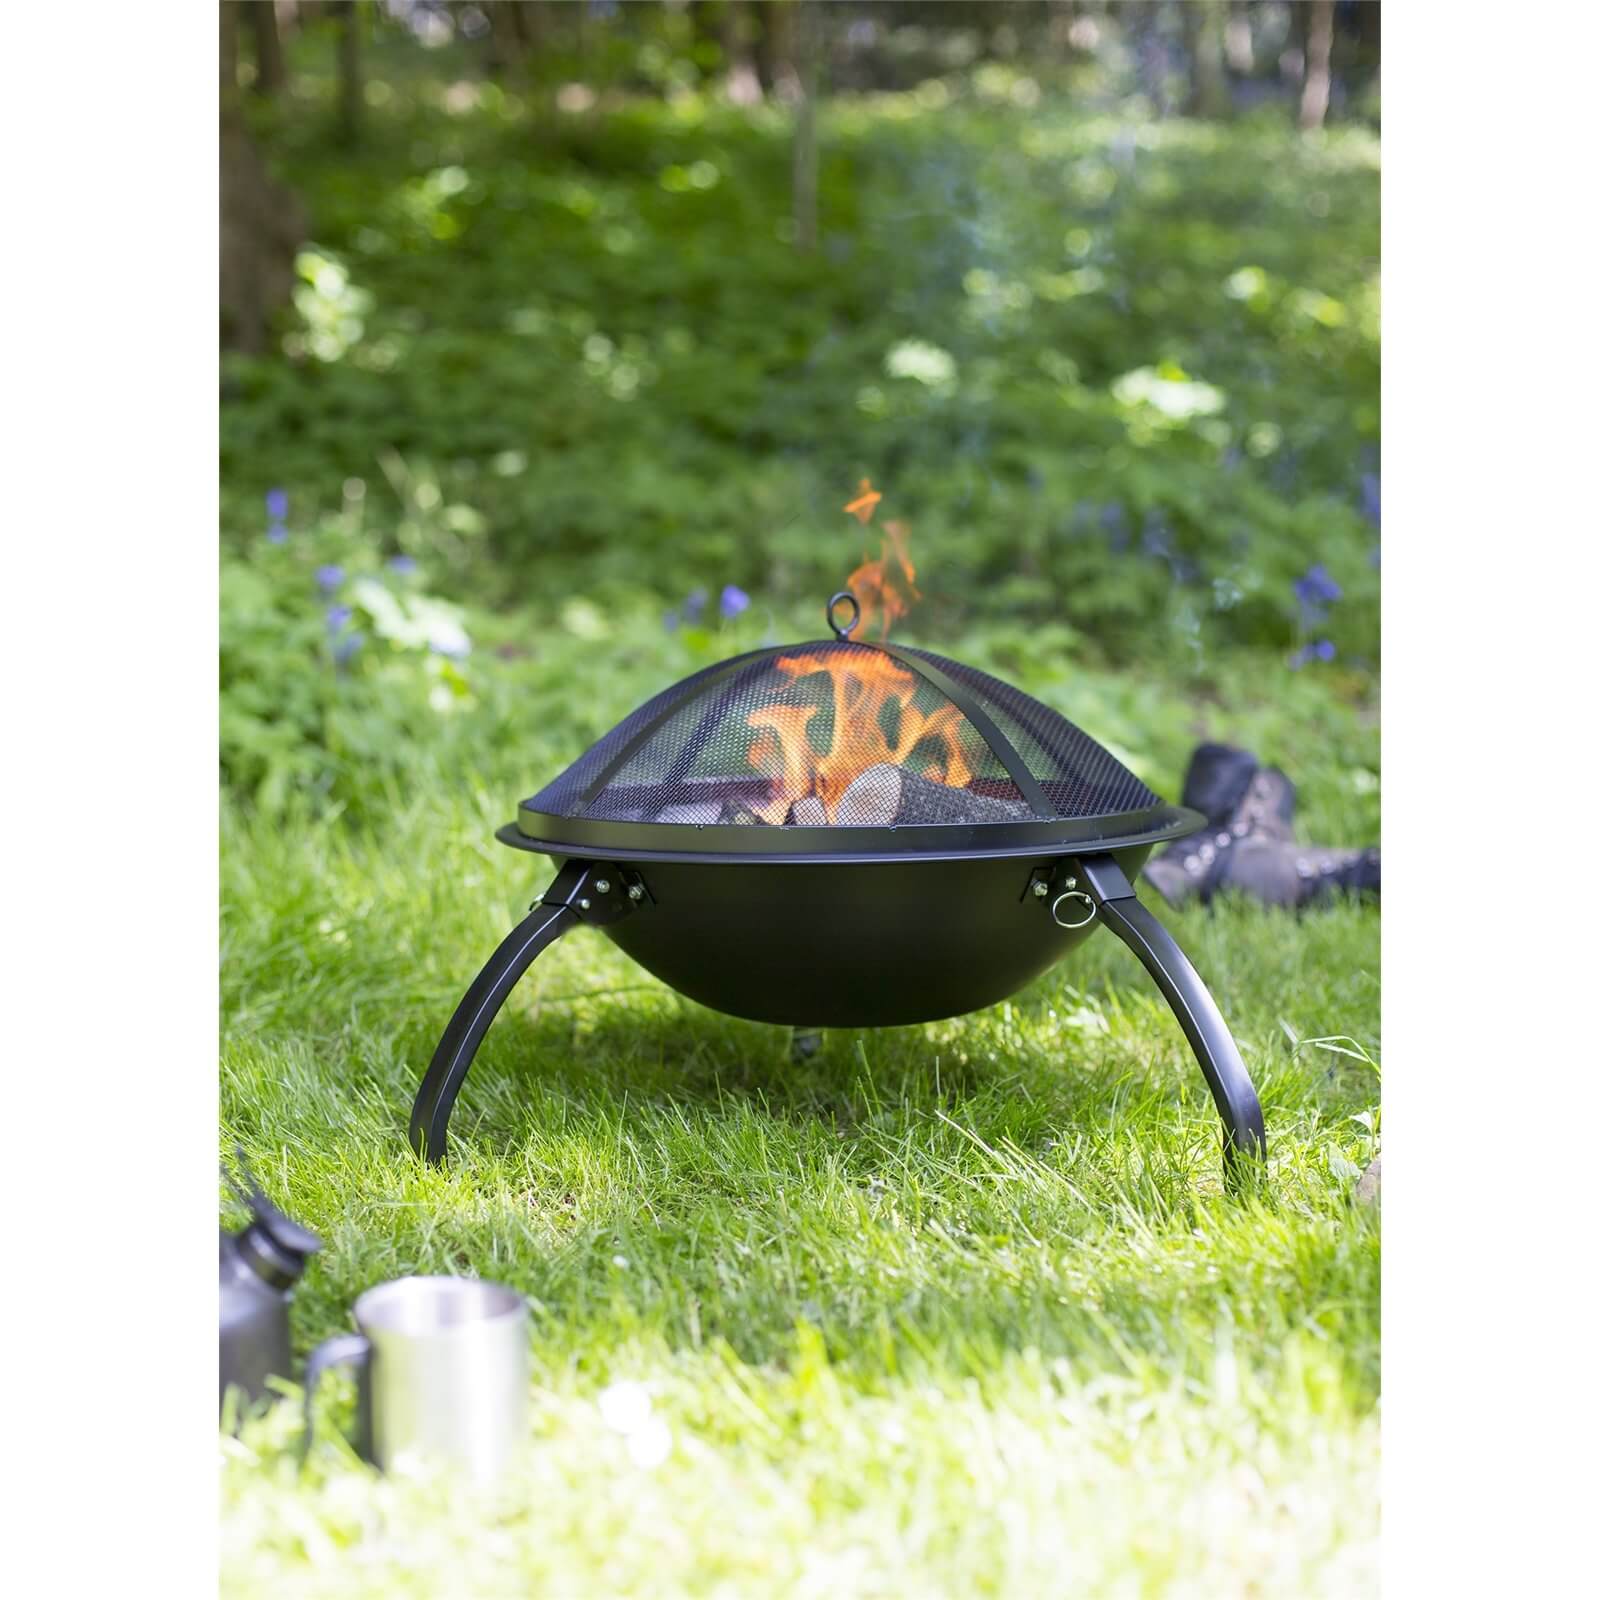 Camping Firepit